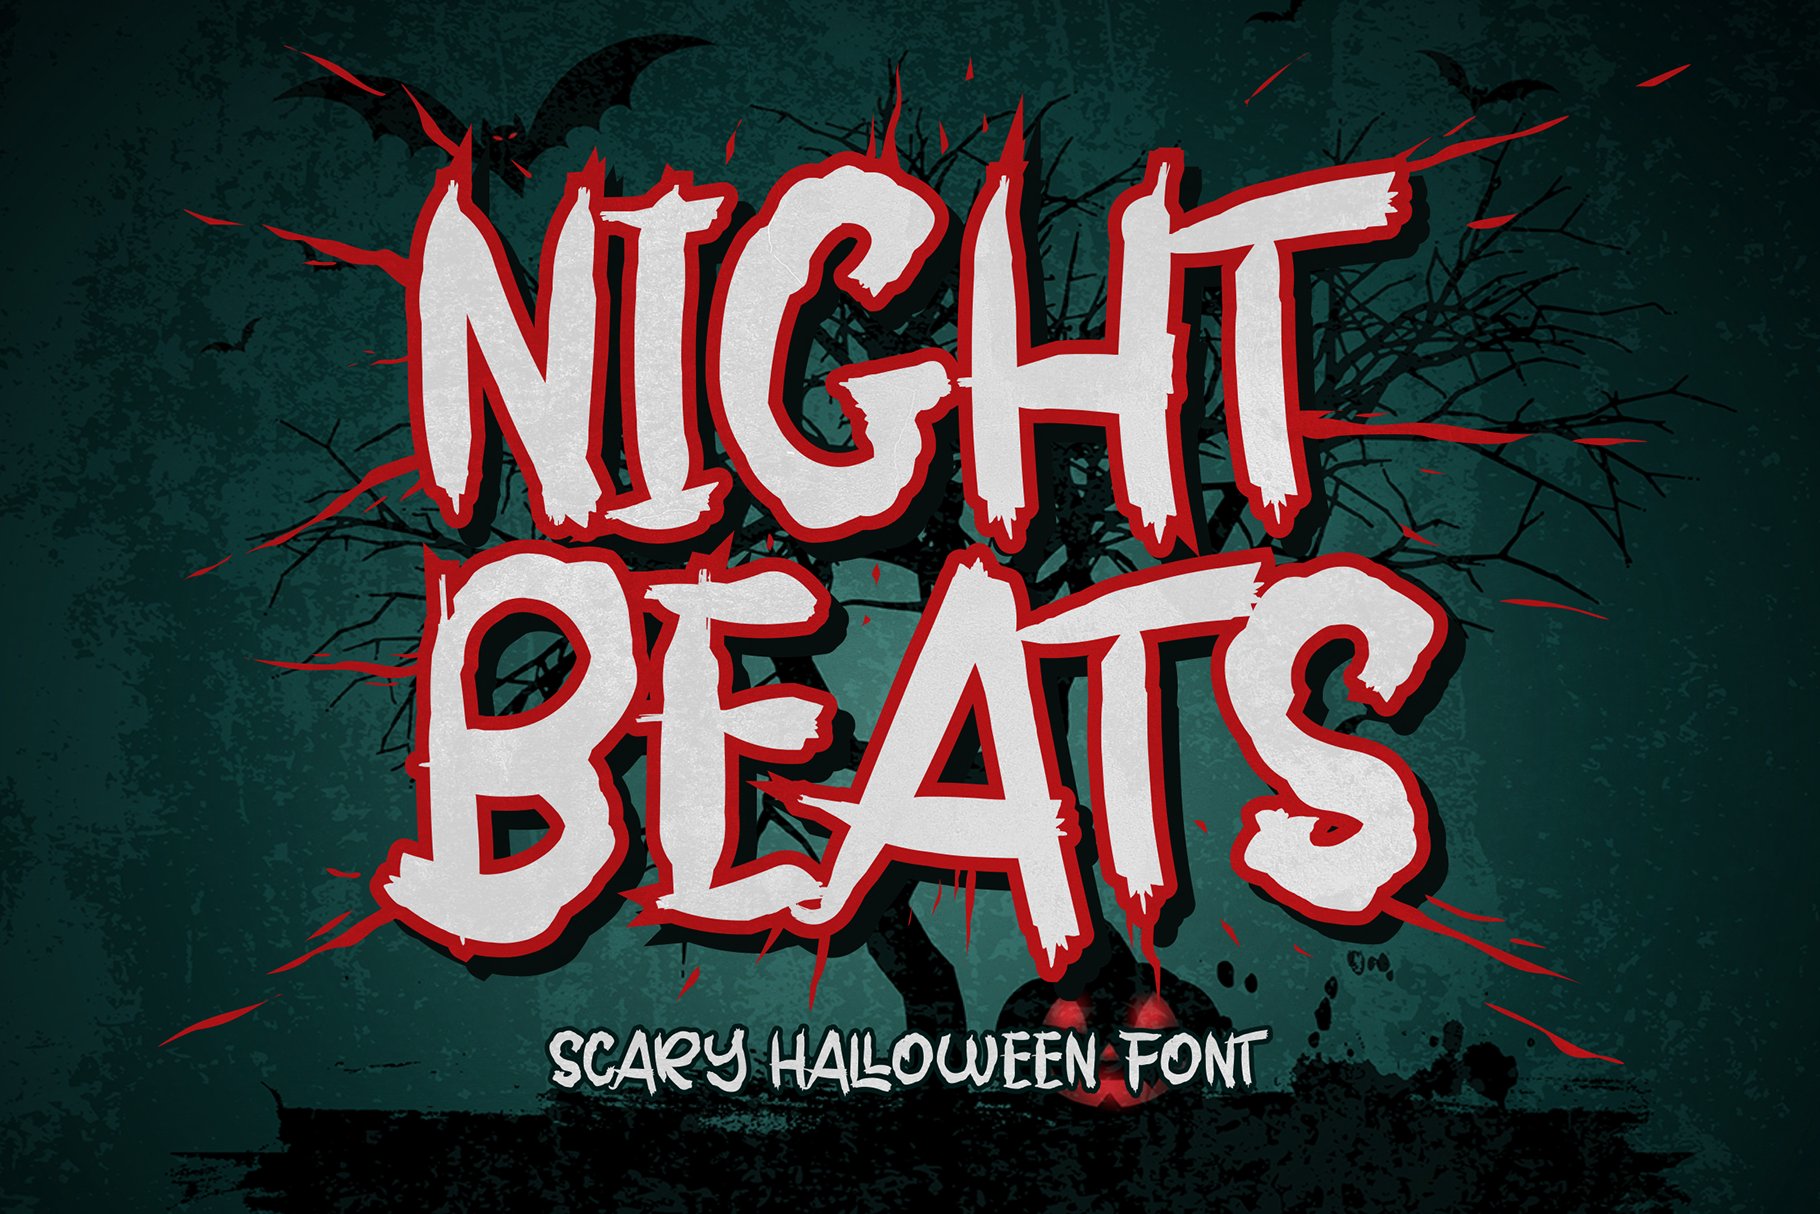 Night Beats - Scary Halloween Font cover image.